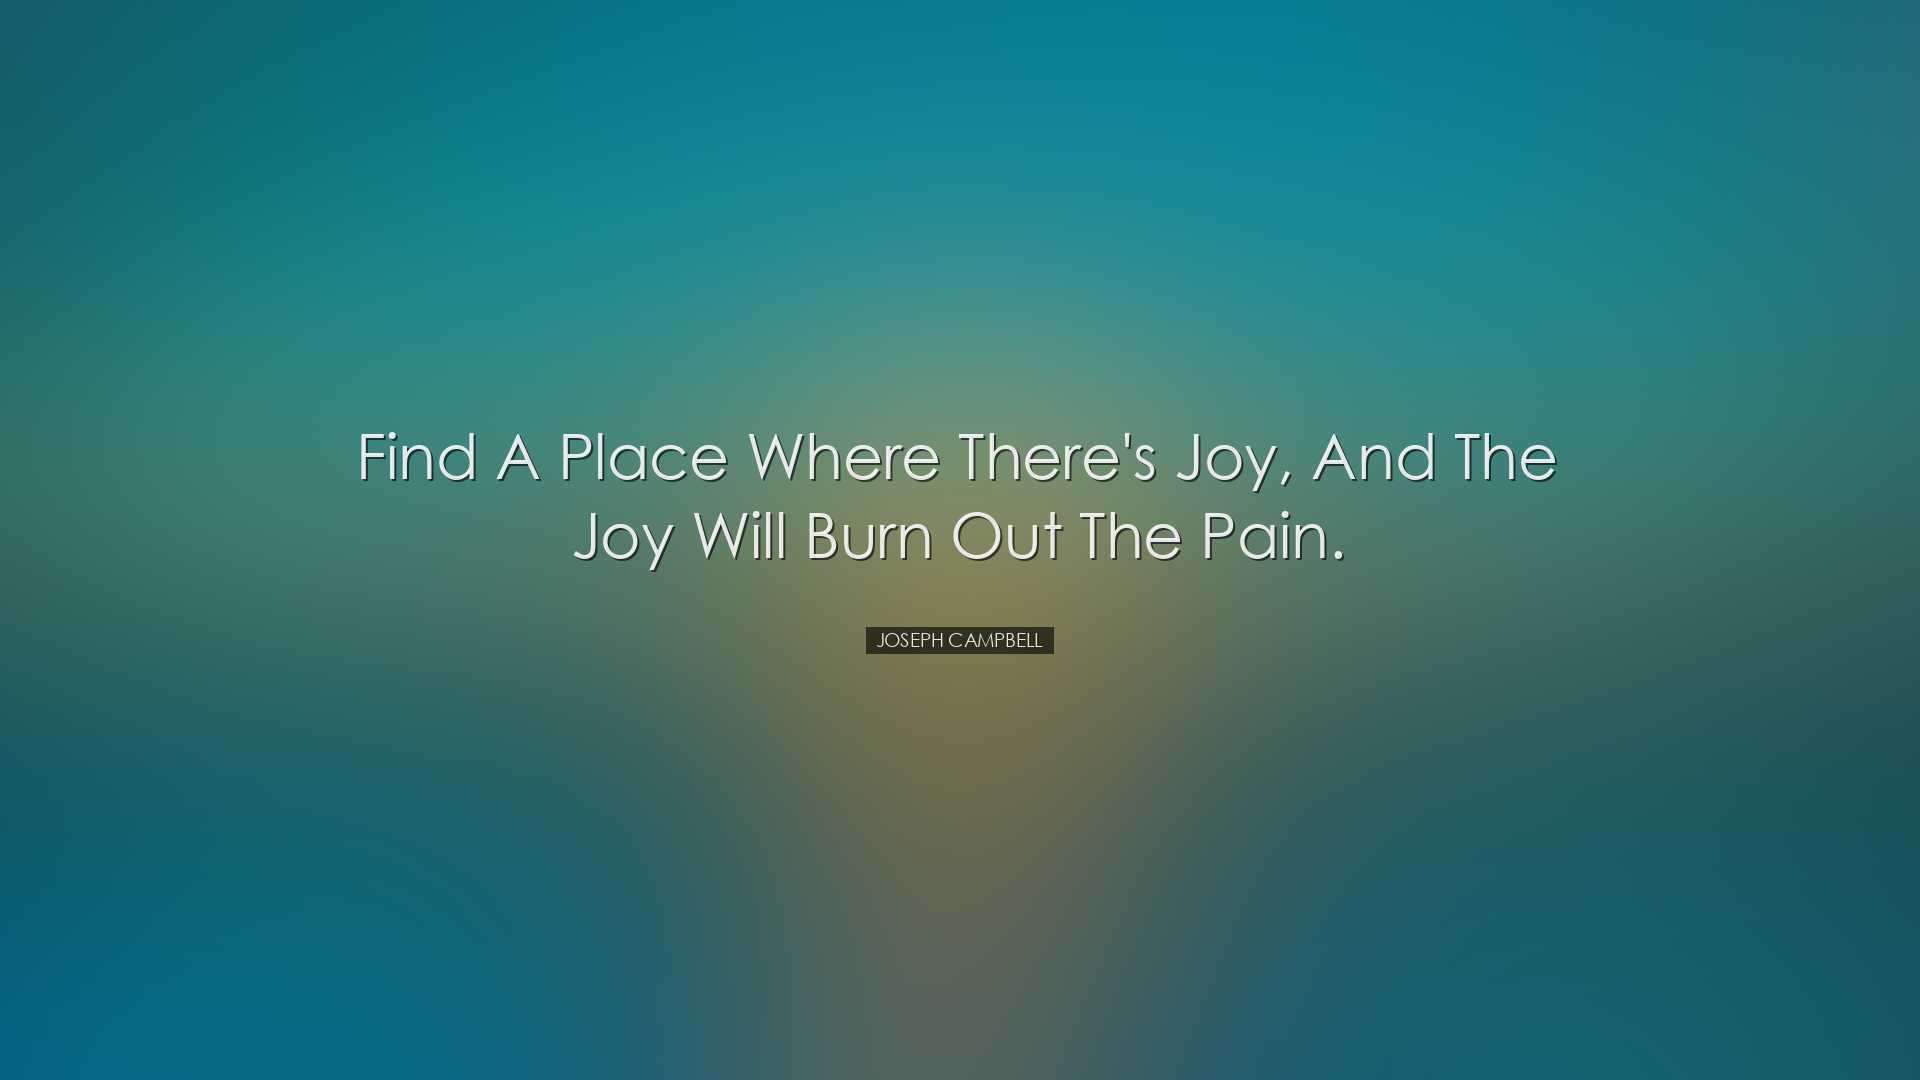 Find a place where there's joy, and the joy will burn out the pain